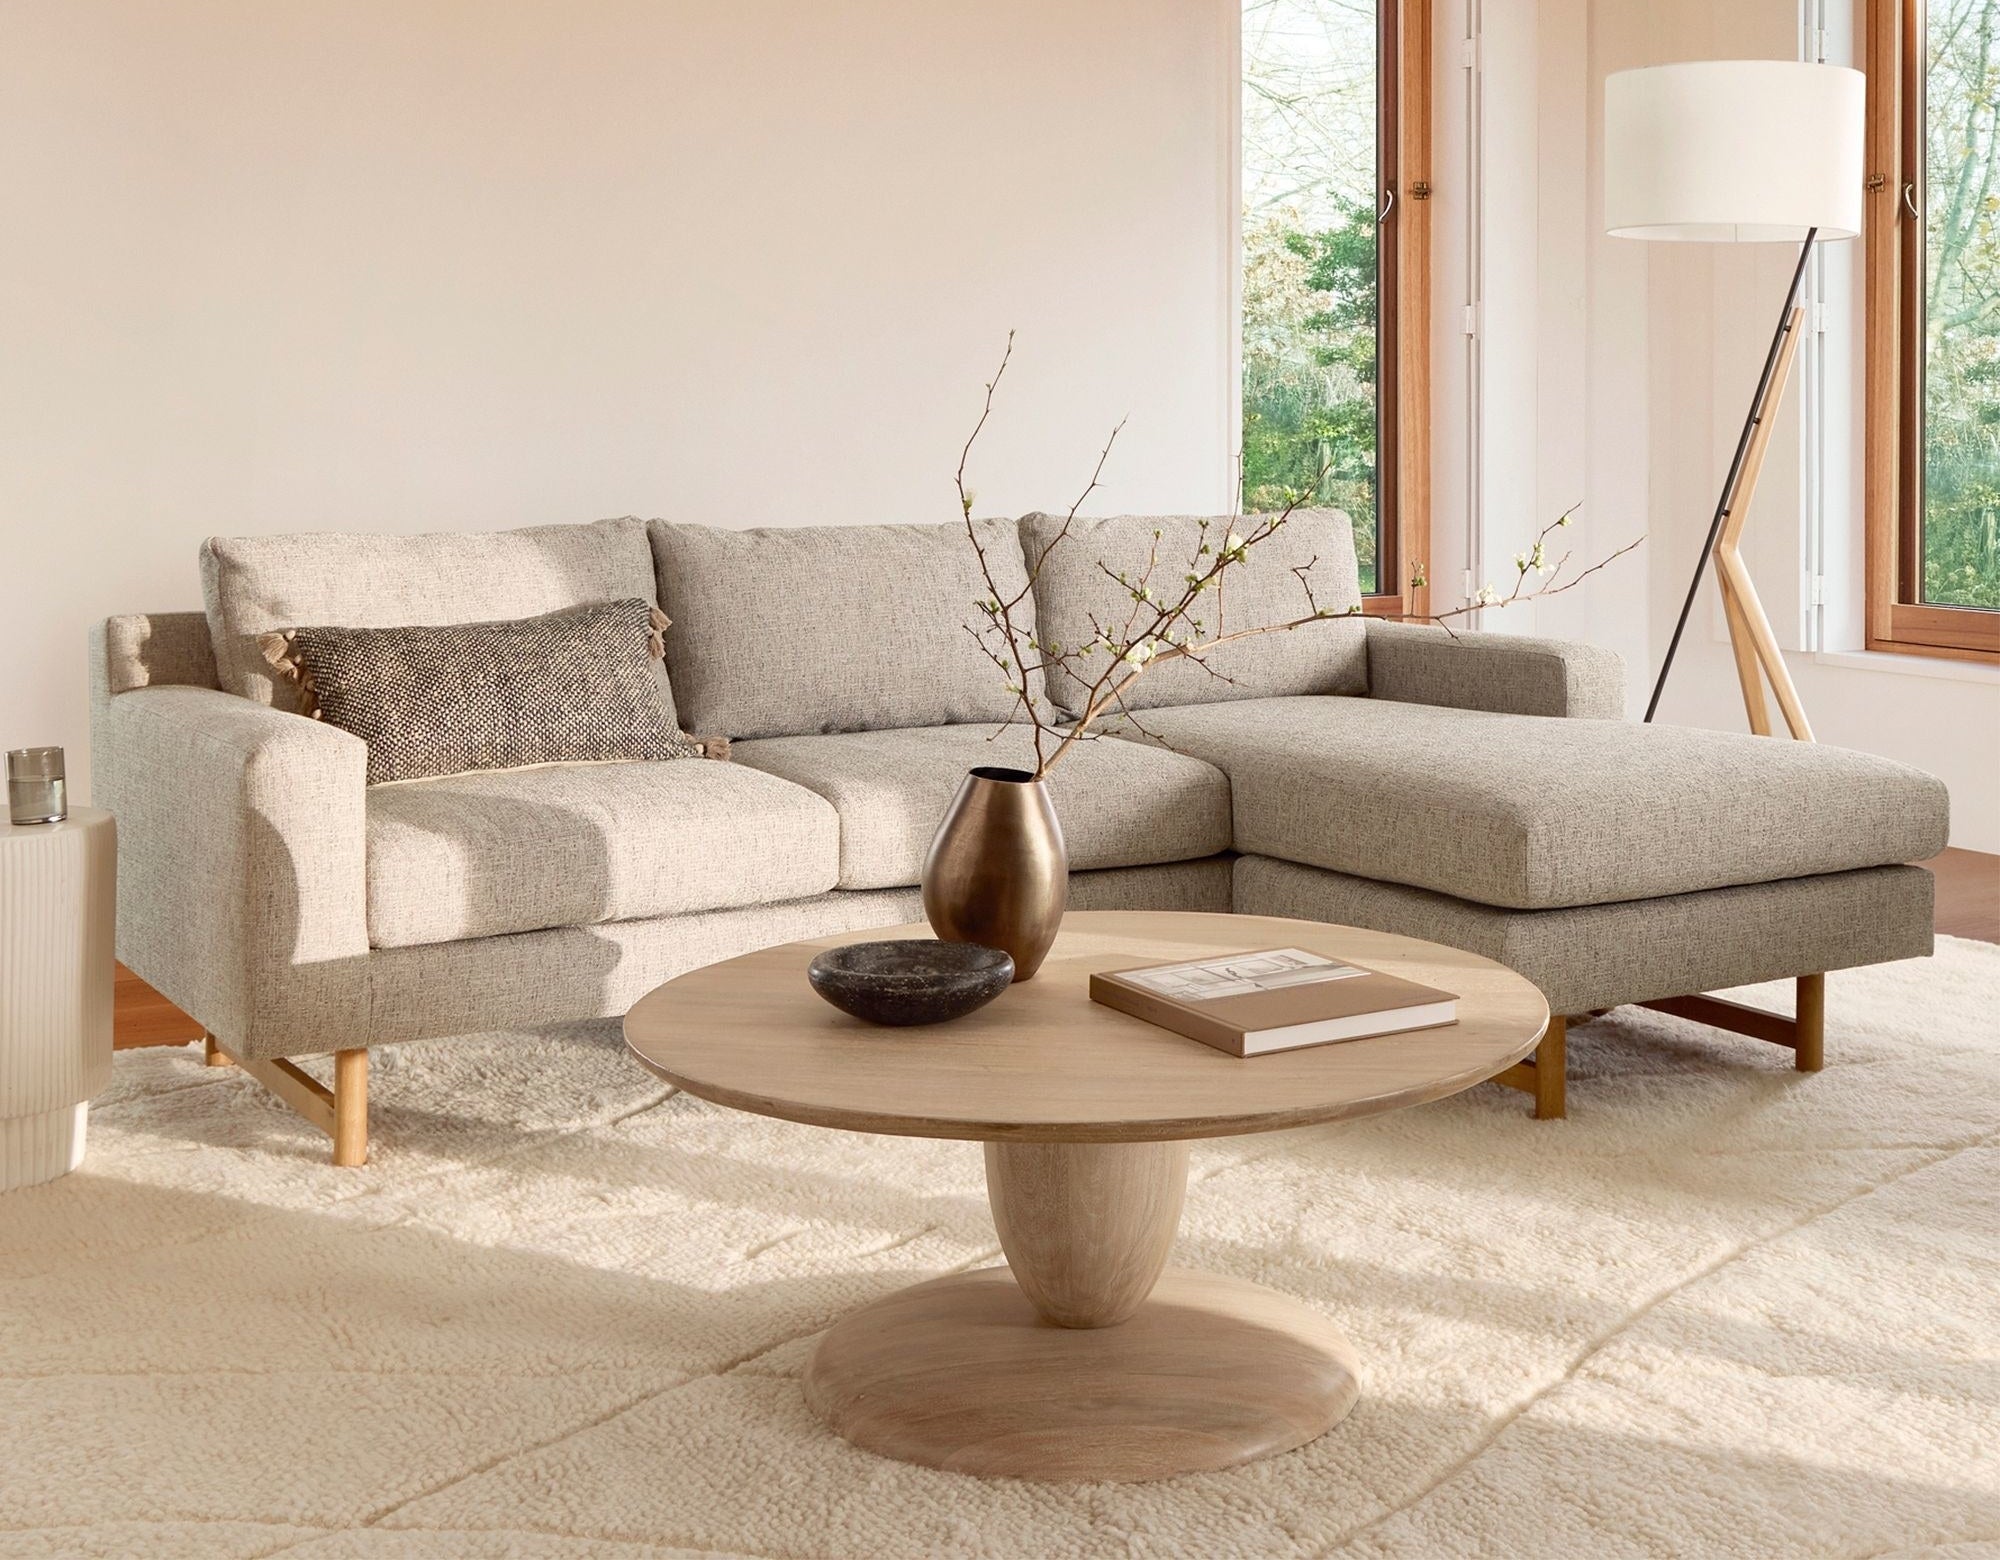 A beige linen sectional is shown in a tasteful living room